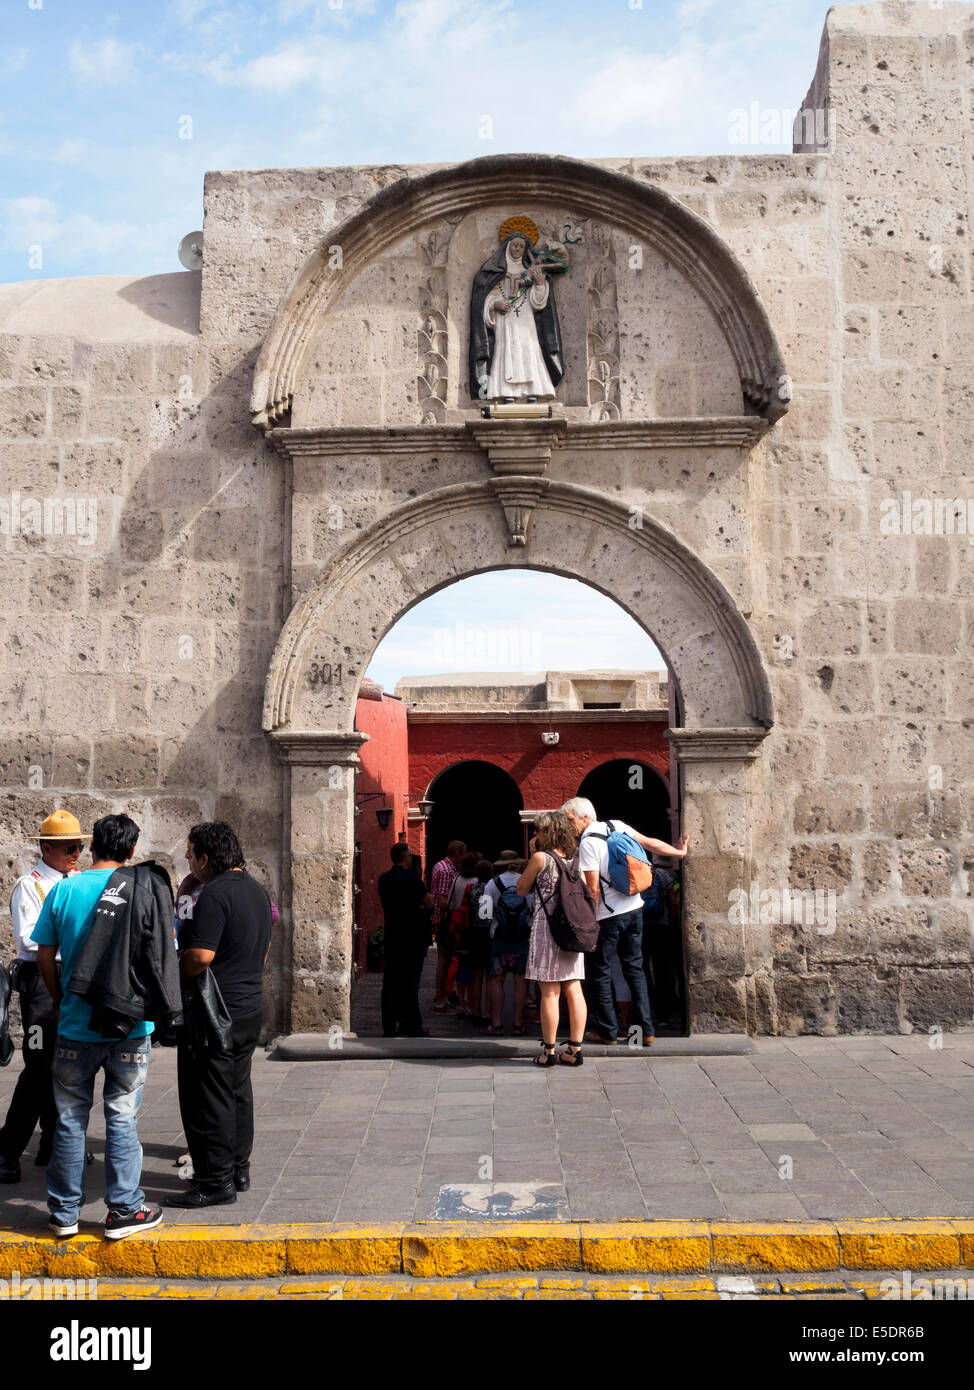 tourists at the Monastery of Saint Catherine's entrance - Arequipa, Peru Stock Photo